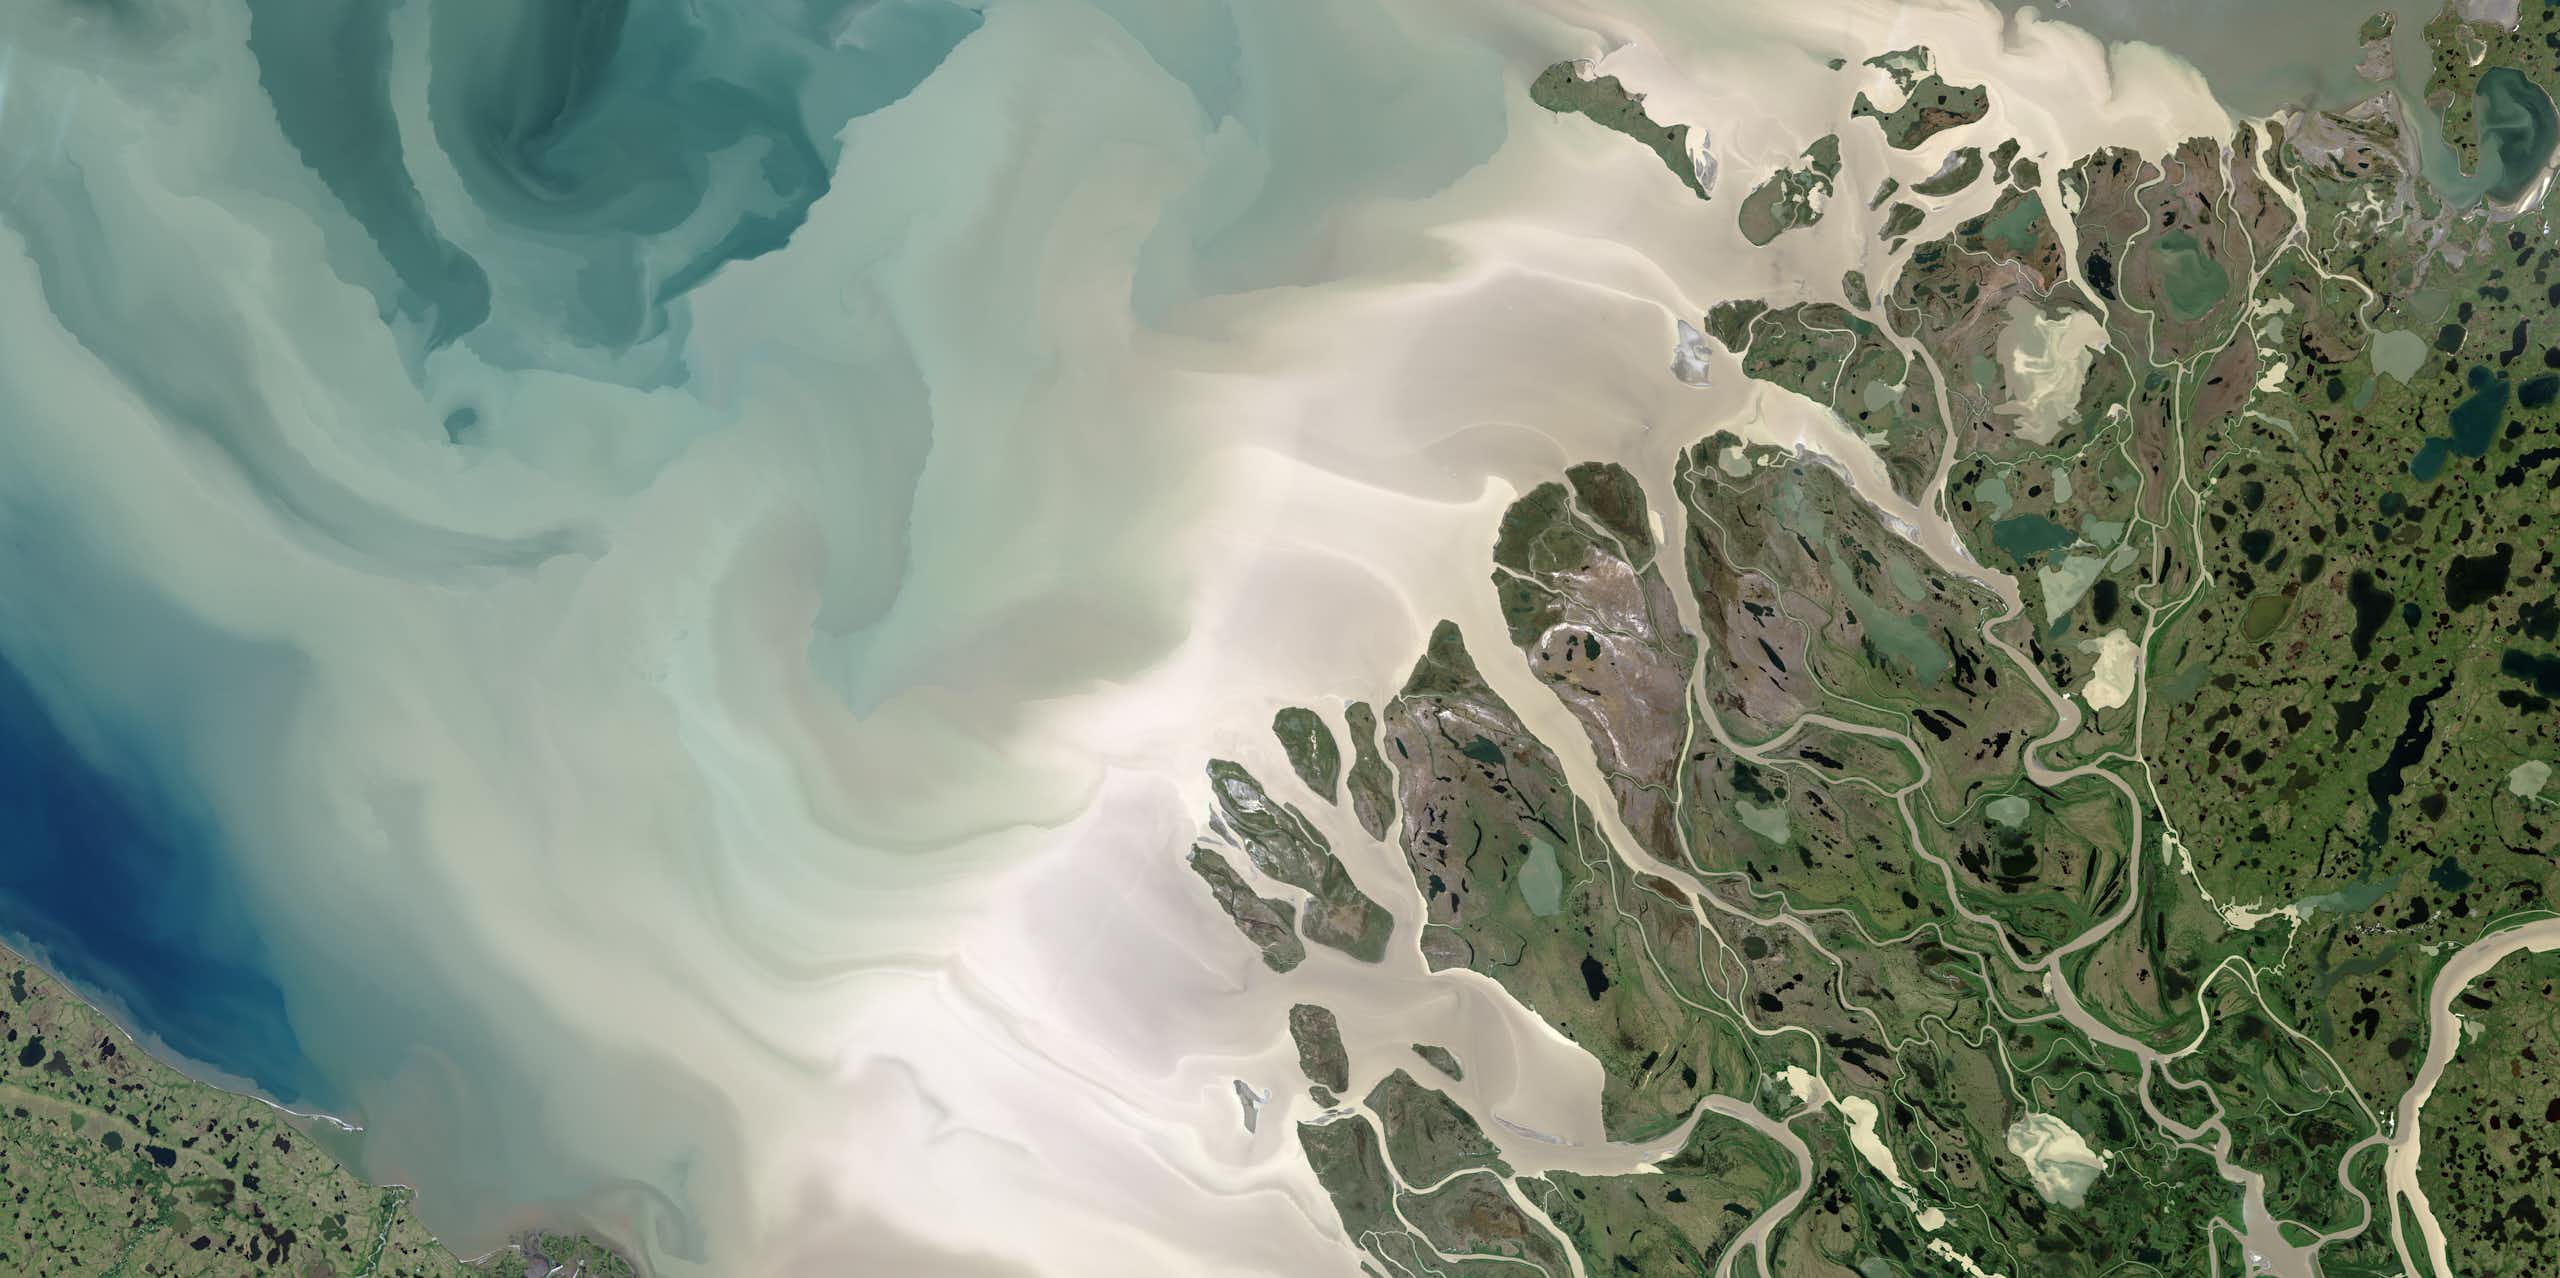 A satellite image of the coast shows in color differences the amount of silt and nutrients the fresh water is mixing into the ocean.